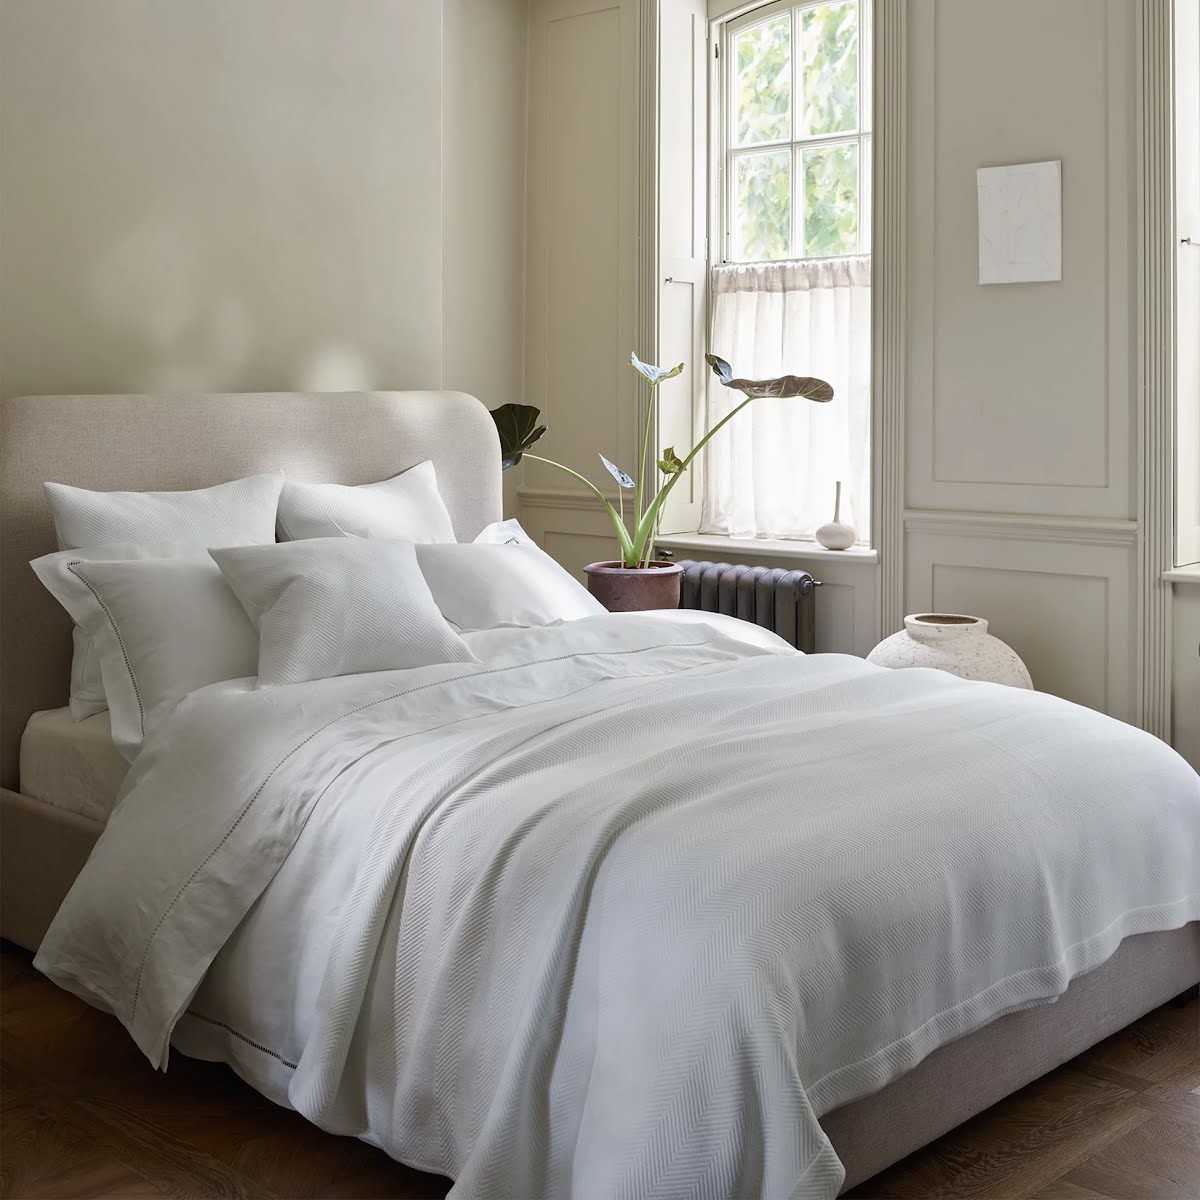 Santorini Linen Bed Linen Collection, From €78, The White Company